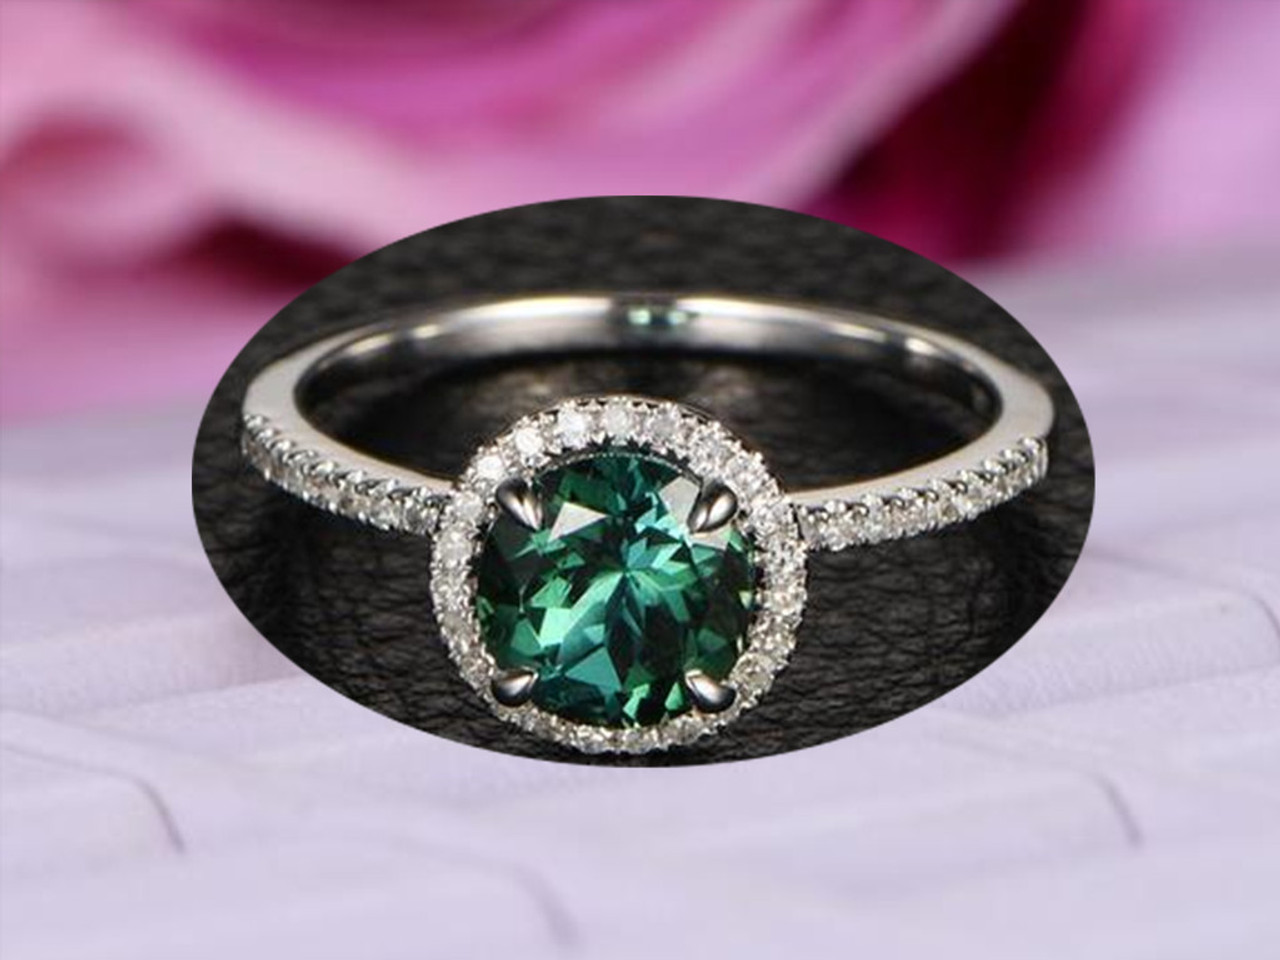 paraiba tourmaline engagement ring - customised the design and it turned  out perfect 💙 : r/EngagementRings